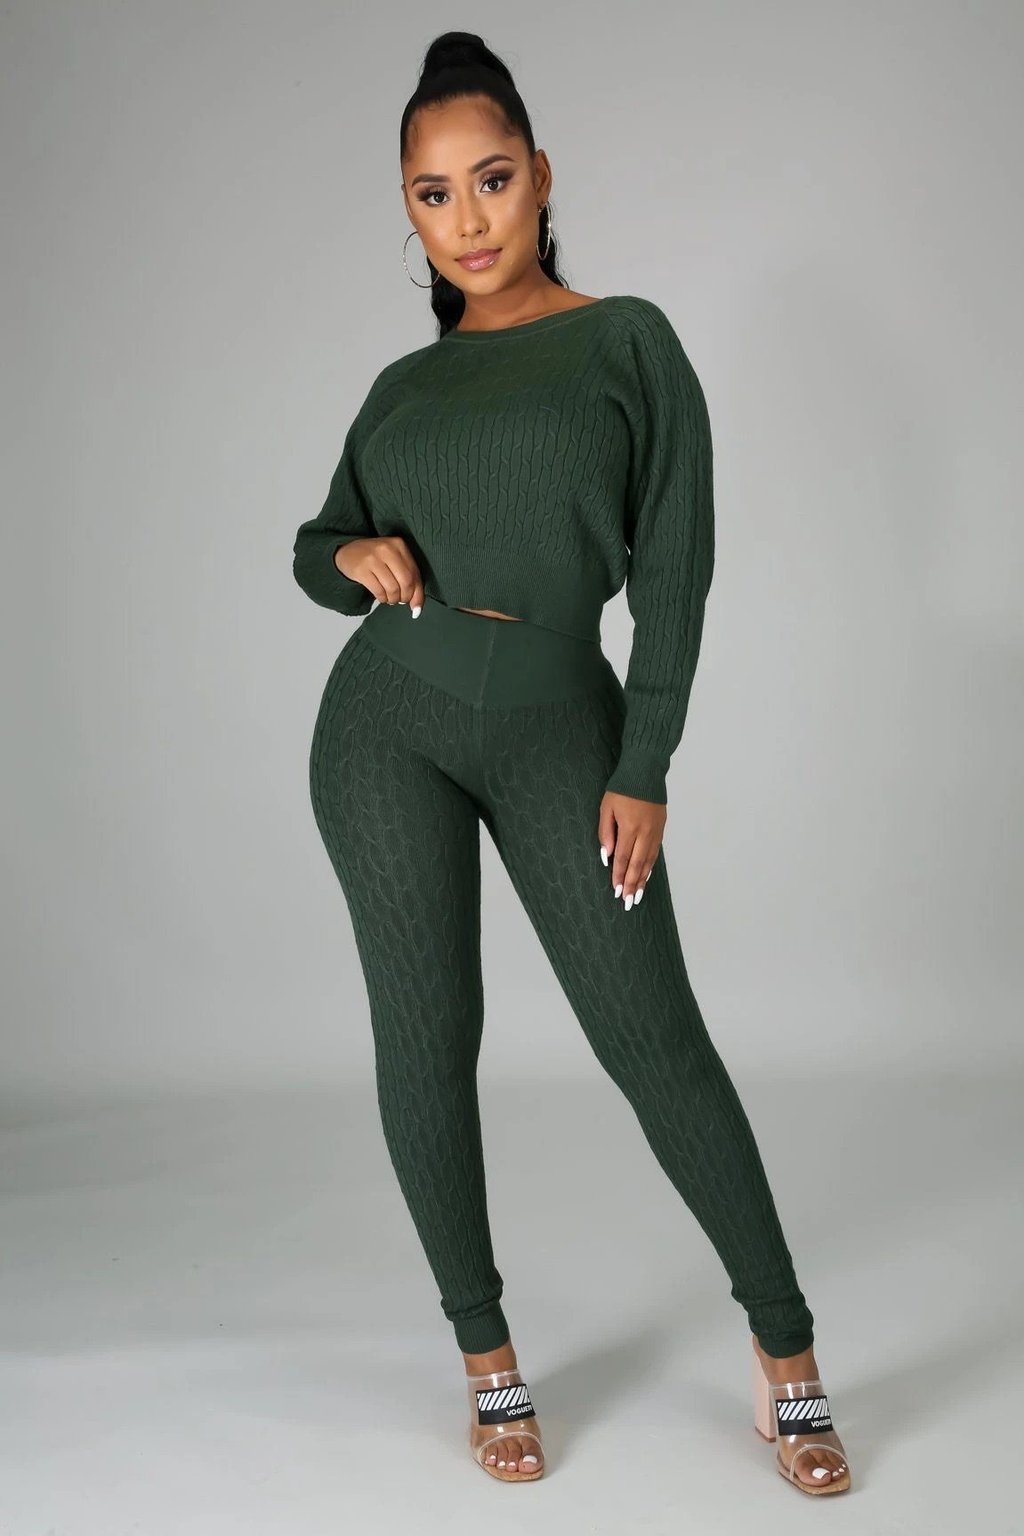 Daisy Knit Sweater Legging Set - DLNI Hair and Fitness